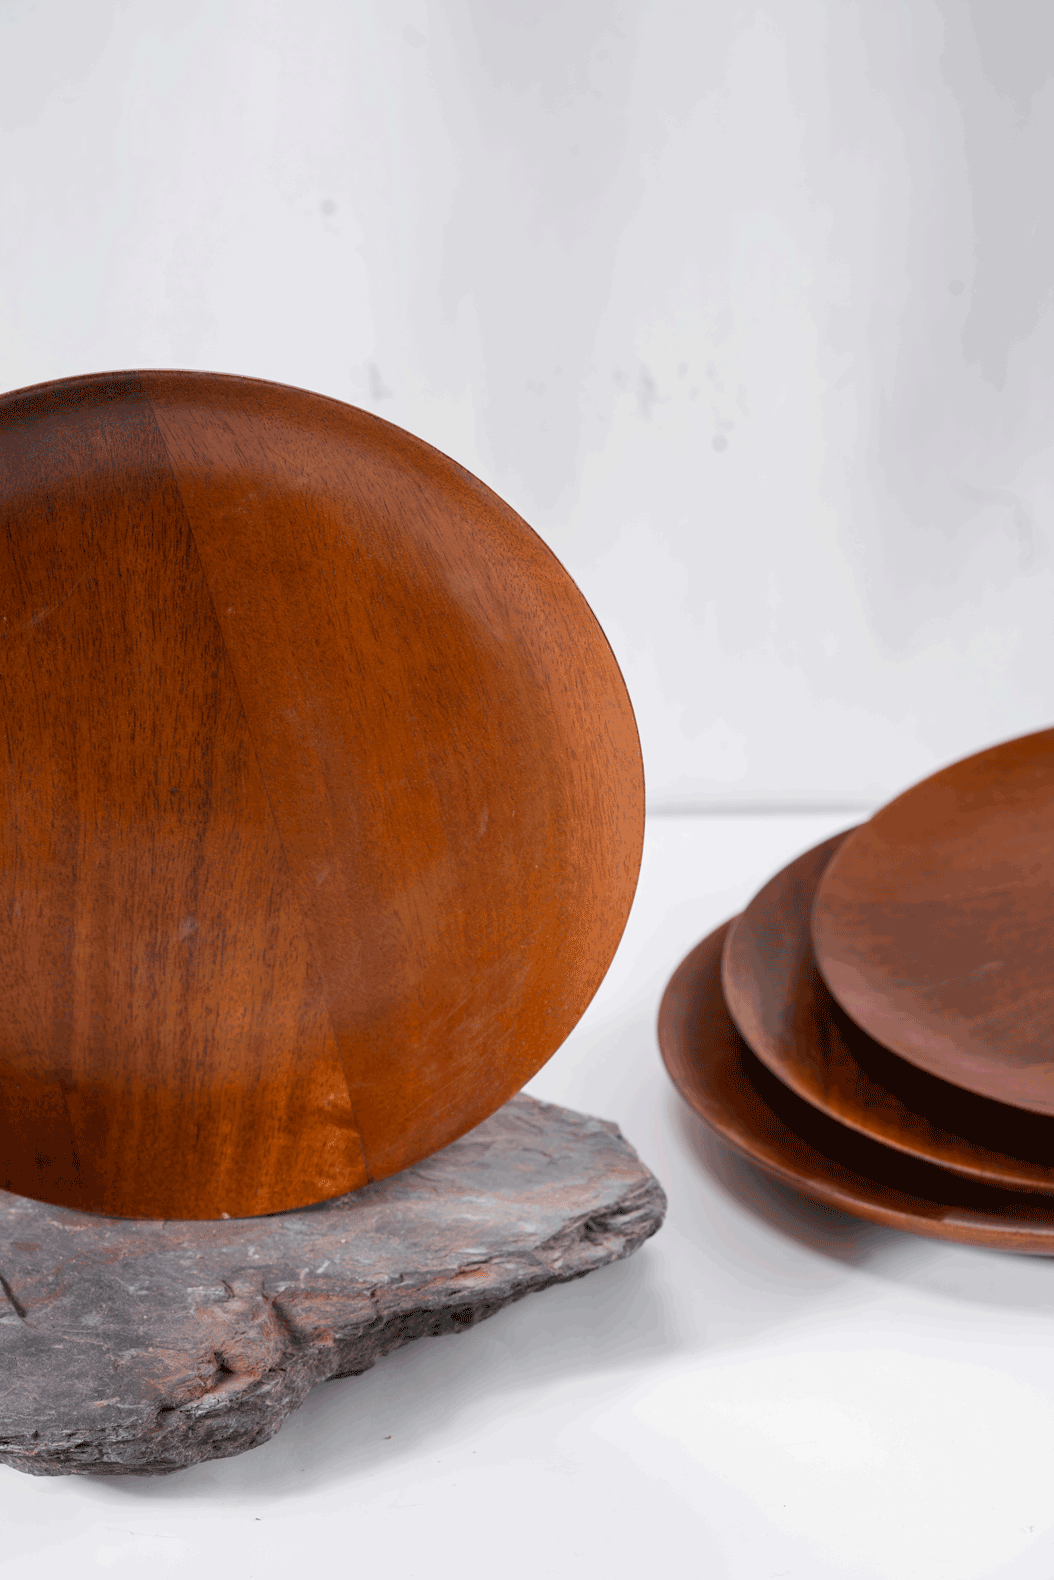 Chakr - Set of 4 wooden plates, a product by Araana Homes